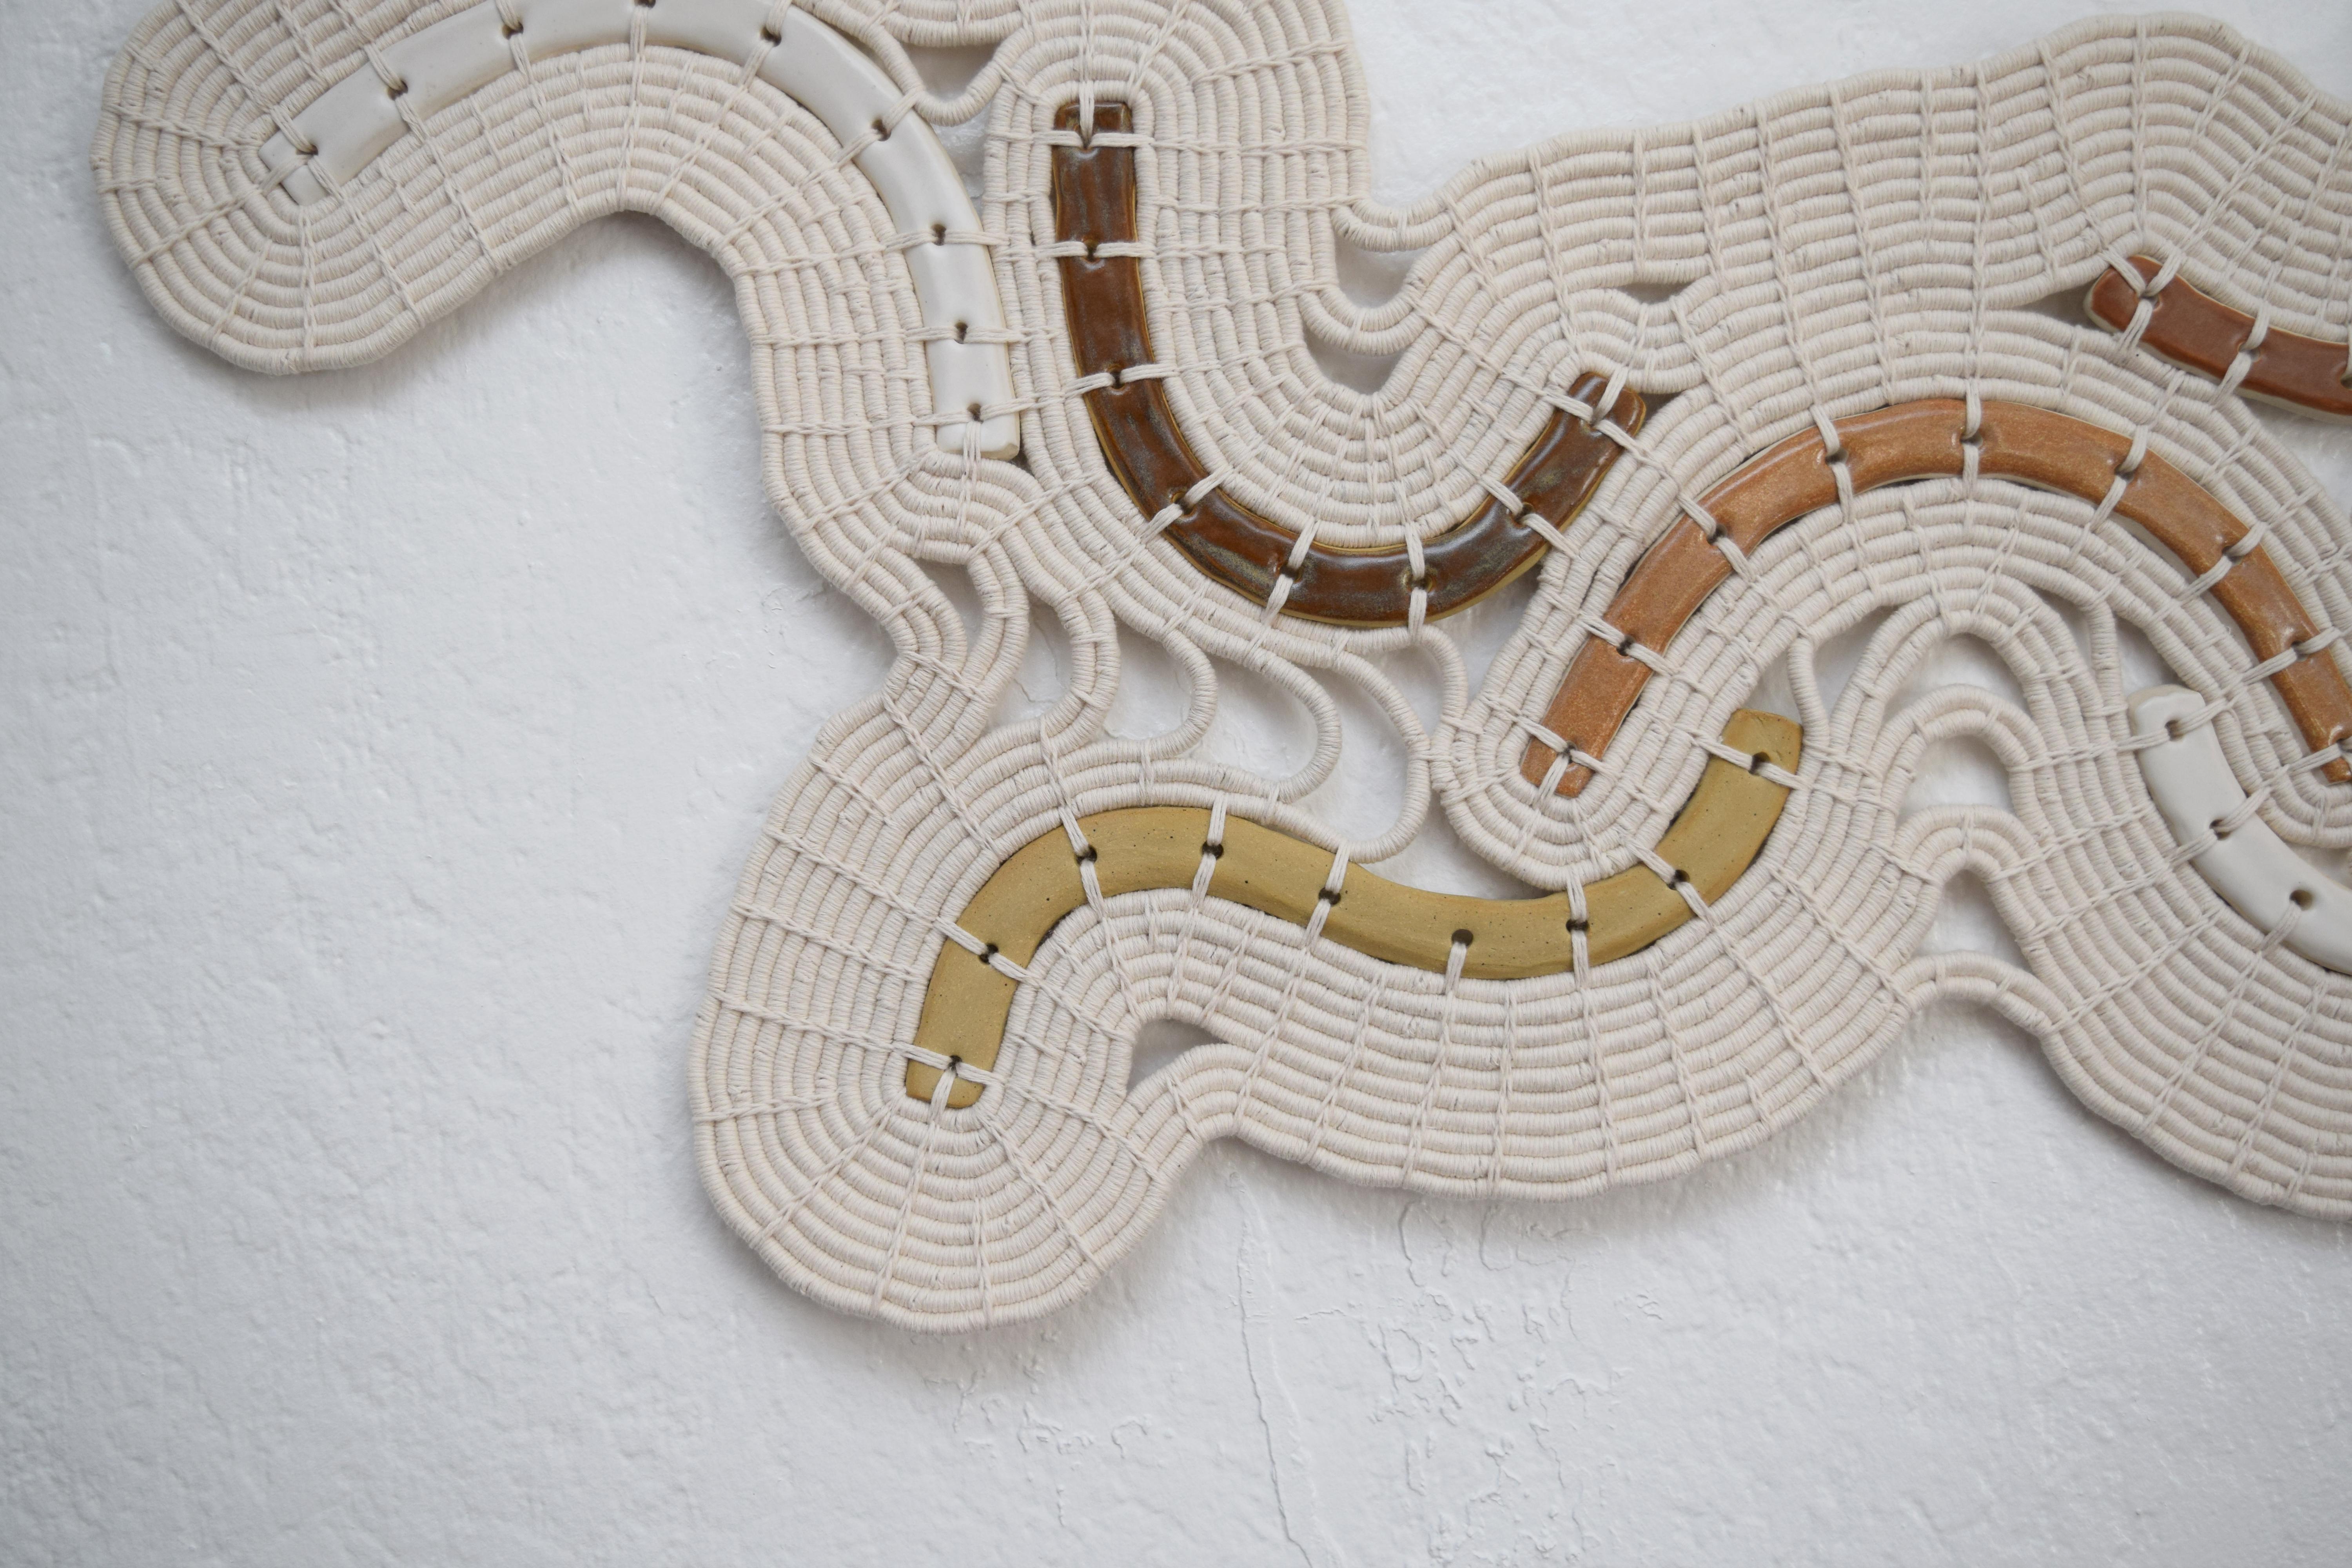 Wall sculpture #716 by Karen Gayle Tinney

One of a Kind Wall Sculpture in ceramic and cotton. Handmade ceramic shapes are finished using variety of neutral glazes. The ceramic pieces are linked together using a coiling technique in white cotton.